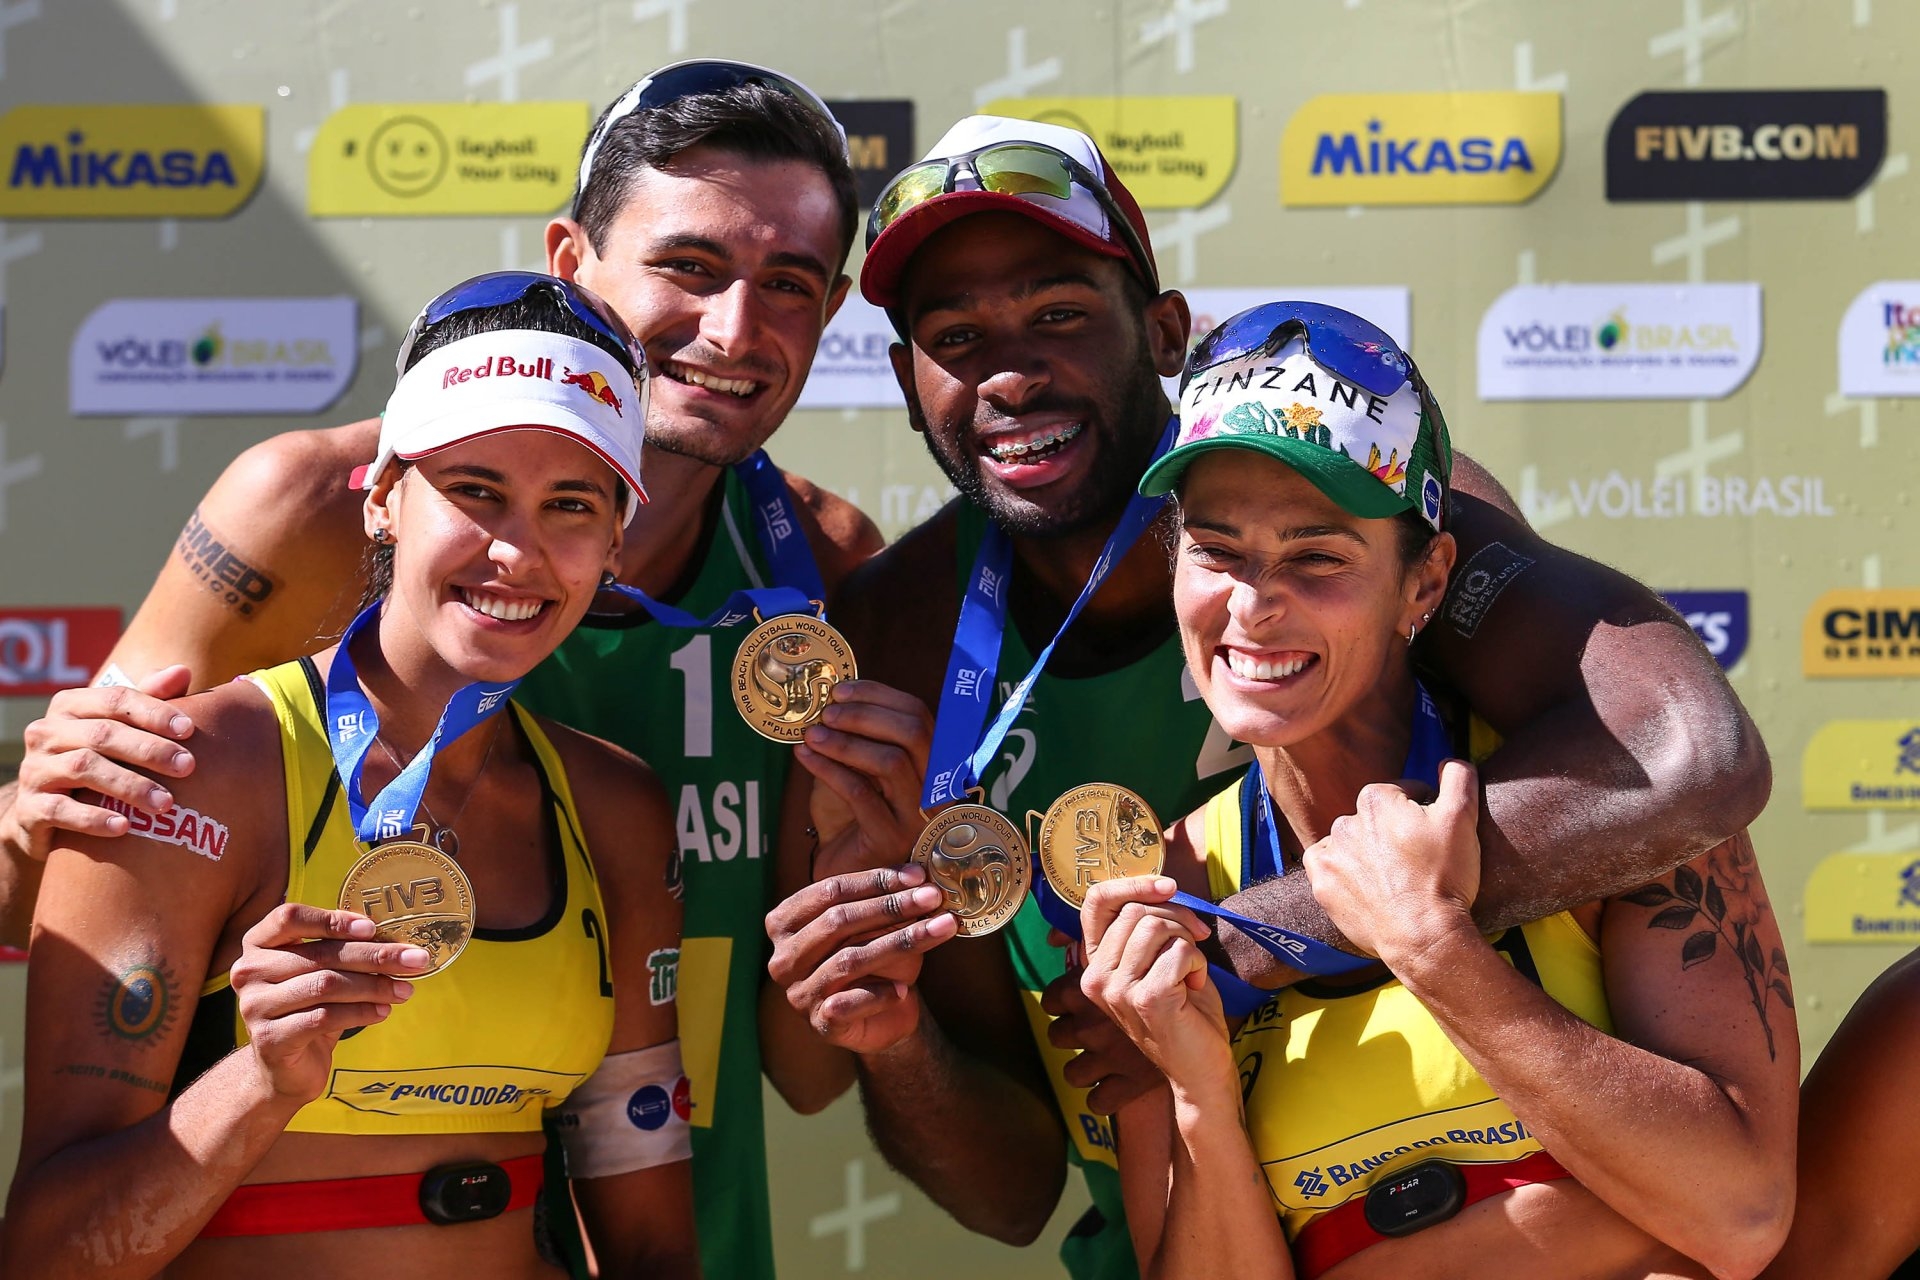 Agatha, Duda, Andre and Evandro pode together in the podium in Itapema (Photocredit: FIVB)